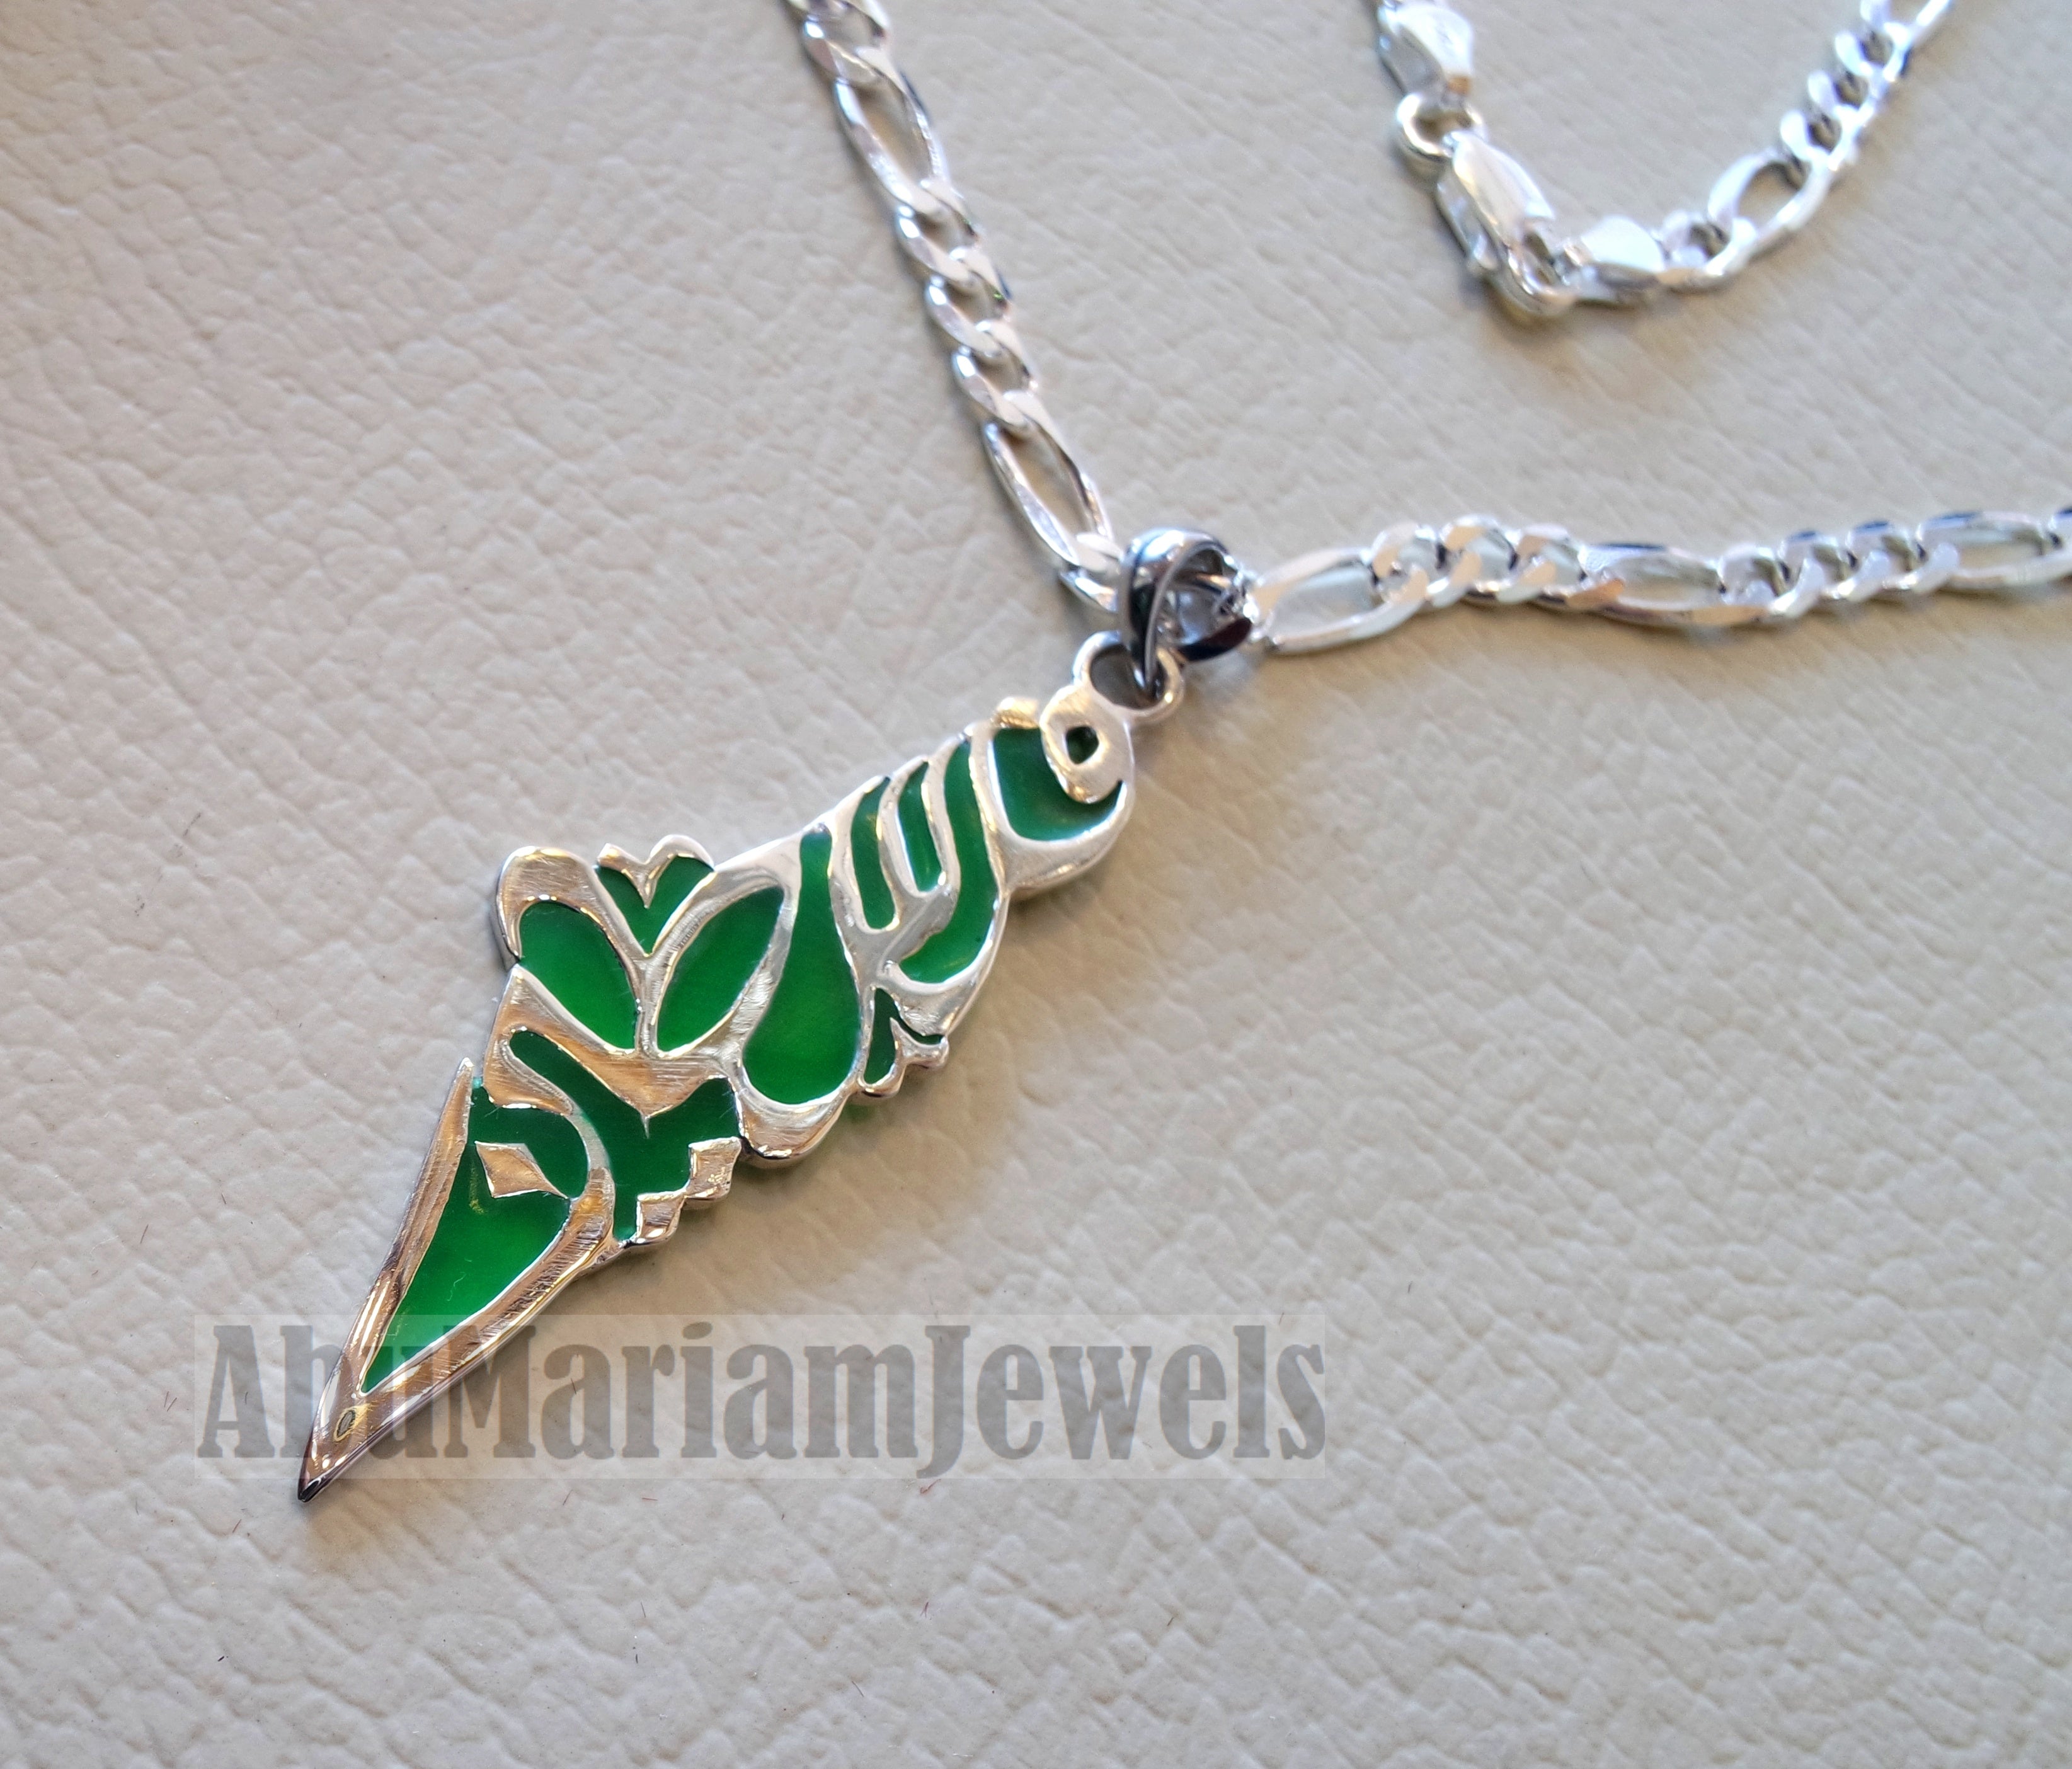 Palestine map pendant sterling silver 925 with thick chain  high quality with green enamel jewelry arabic calligraphy fast shipping خارطه فلسطين